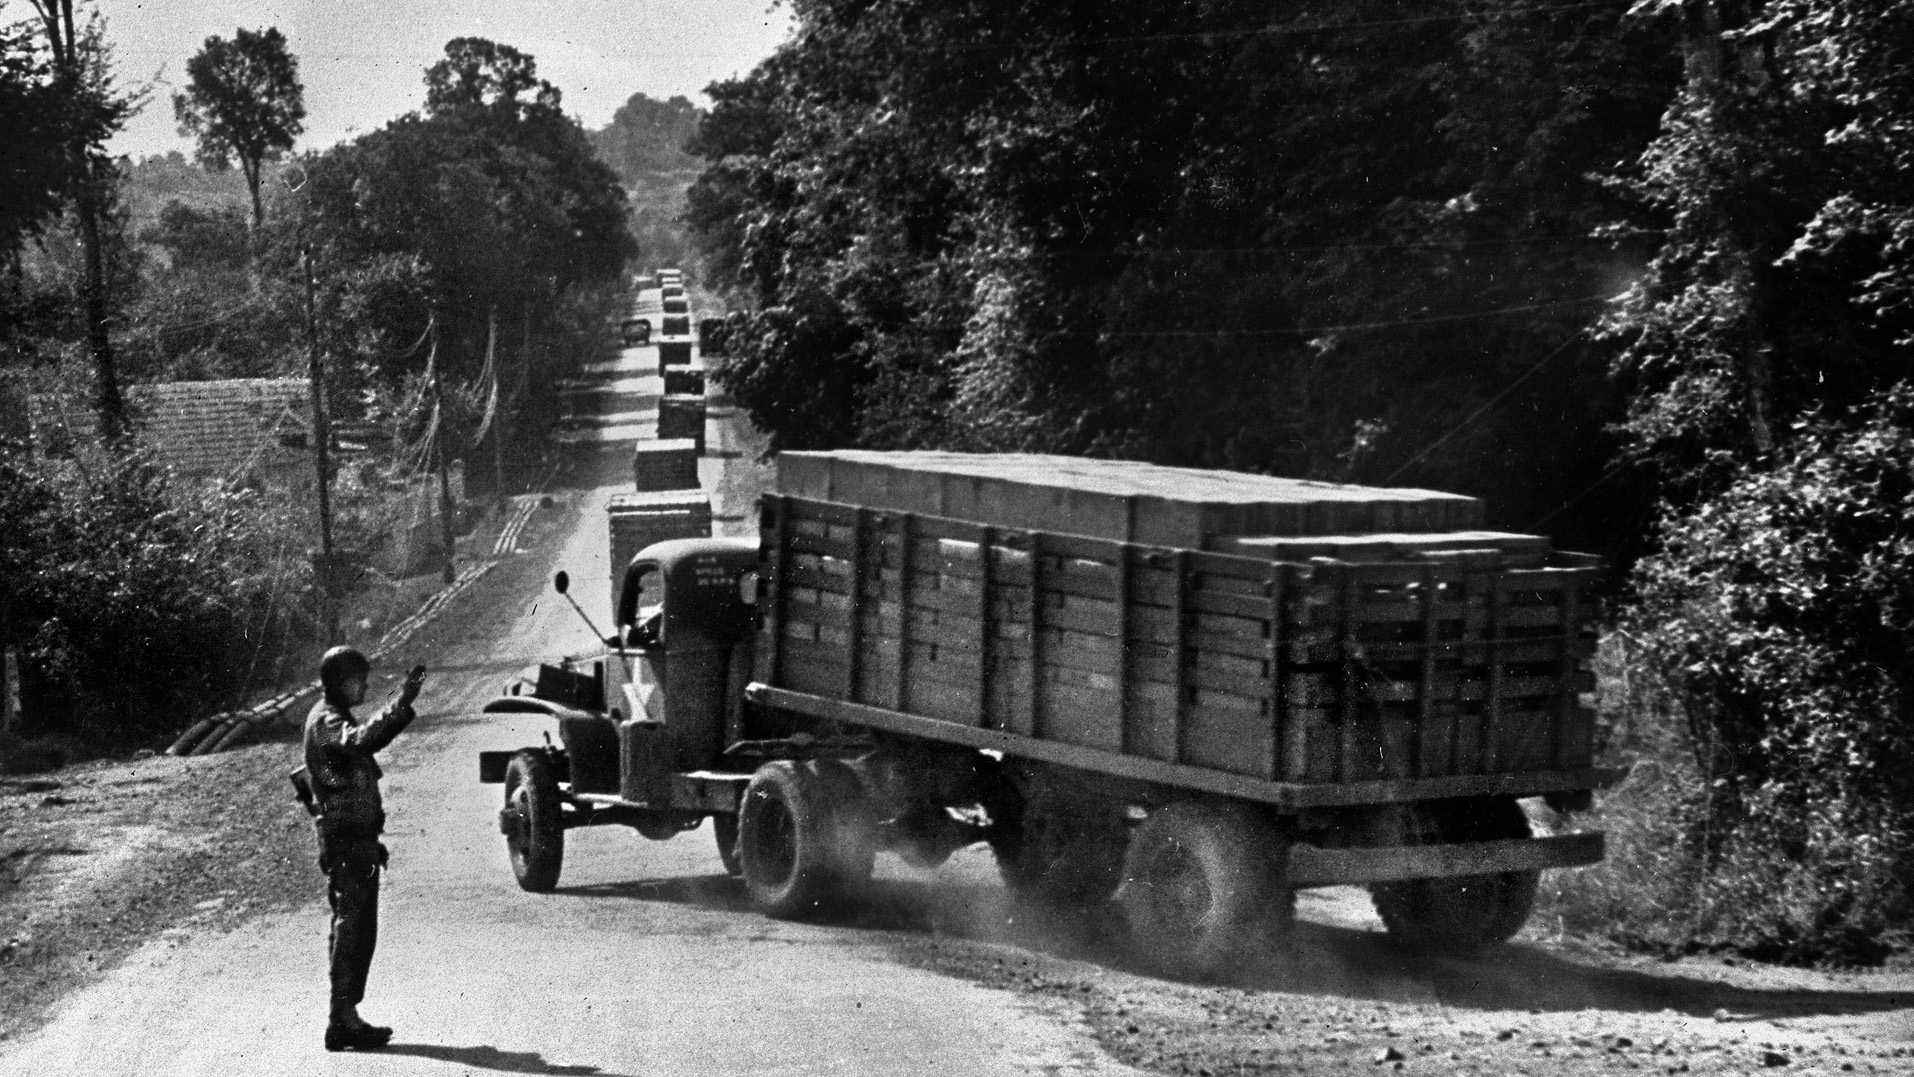 The road to victory: A military policeman waves through another truck rushing cargo on a one-way highway to the fast-moving front lines in Normandy, France, August 1944. The mostly African American drivers of the Red Ball Express realized that without a steady stream of food, fuel, ammunition, medical equipment, troops, and other critical supplies, the Allied advance would grind to a halt.